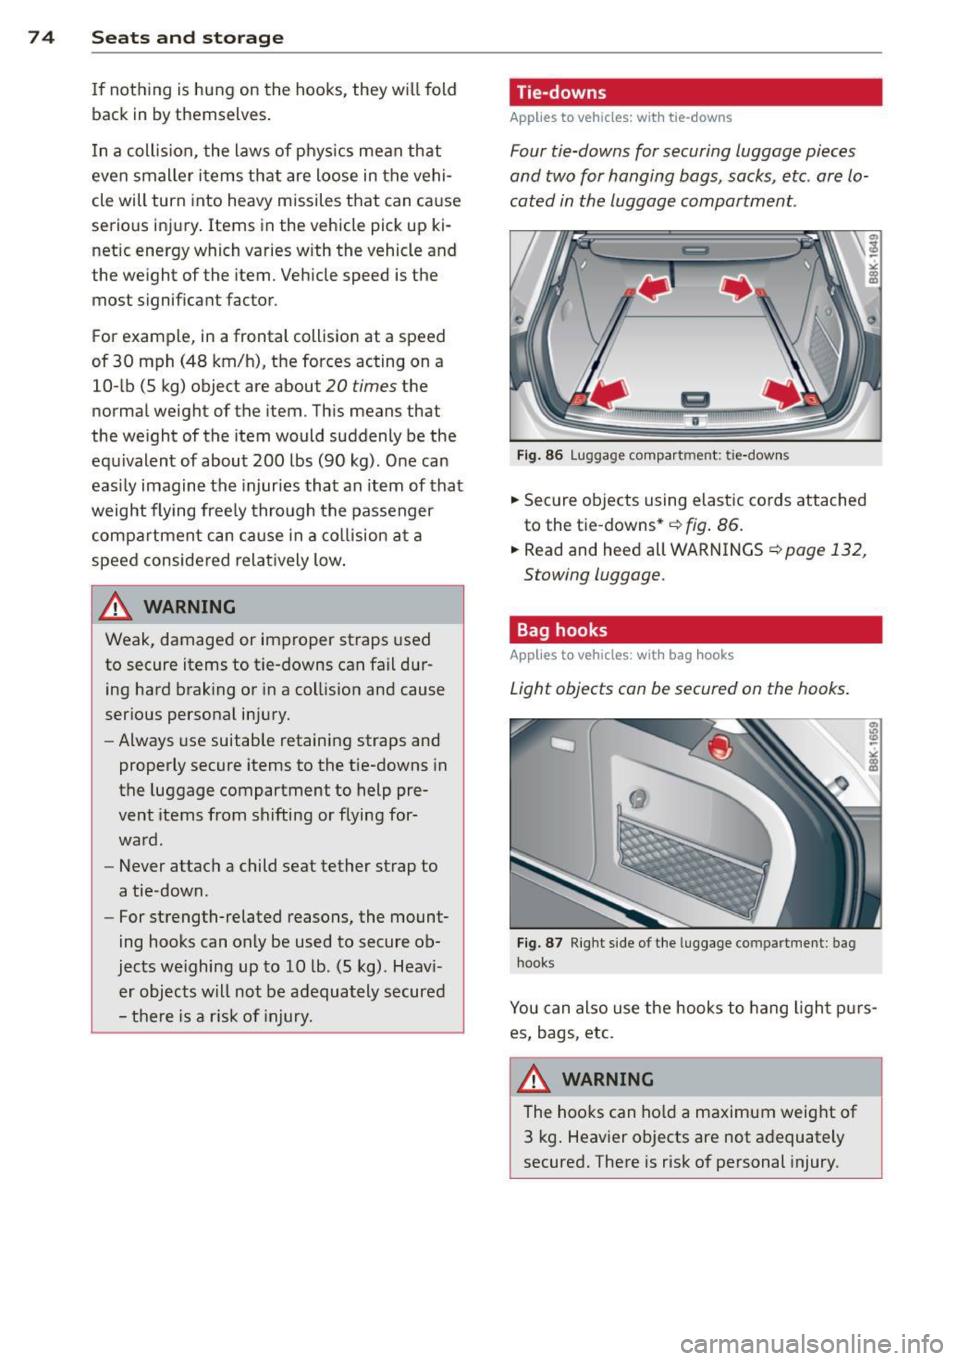 AUDI S4 2015  Owners Manual 7 4  Seats  and storage 
If nothing  is hung  on  the  hooks,  they  will fold 
back  in  by themselves. 
In  a collision,  the  laws  of  physics  mean  that 
even  smaller  items  that  are  loose  